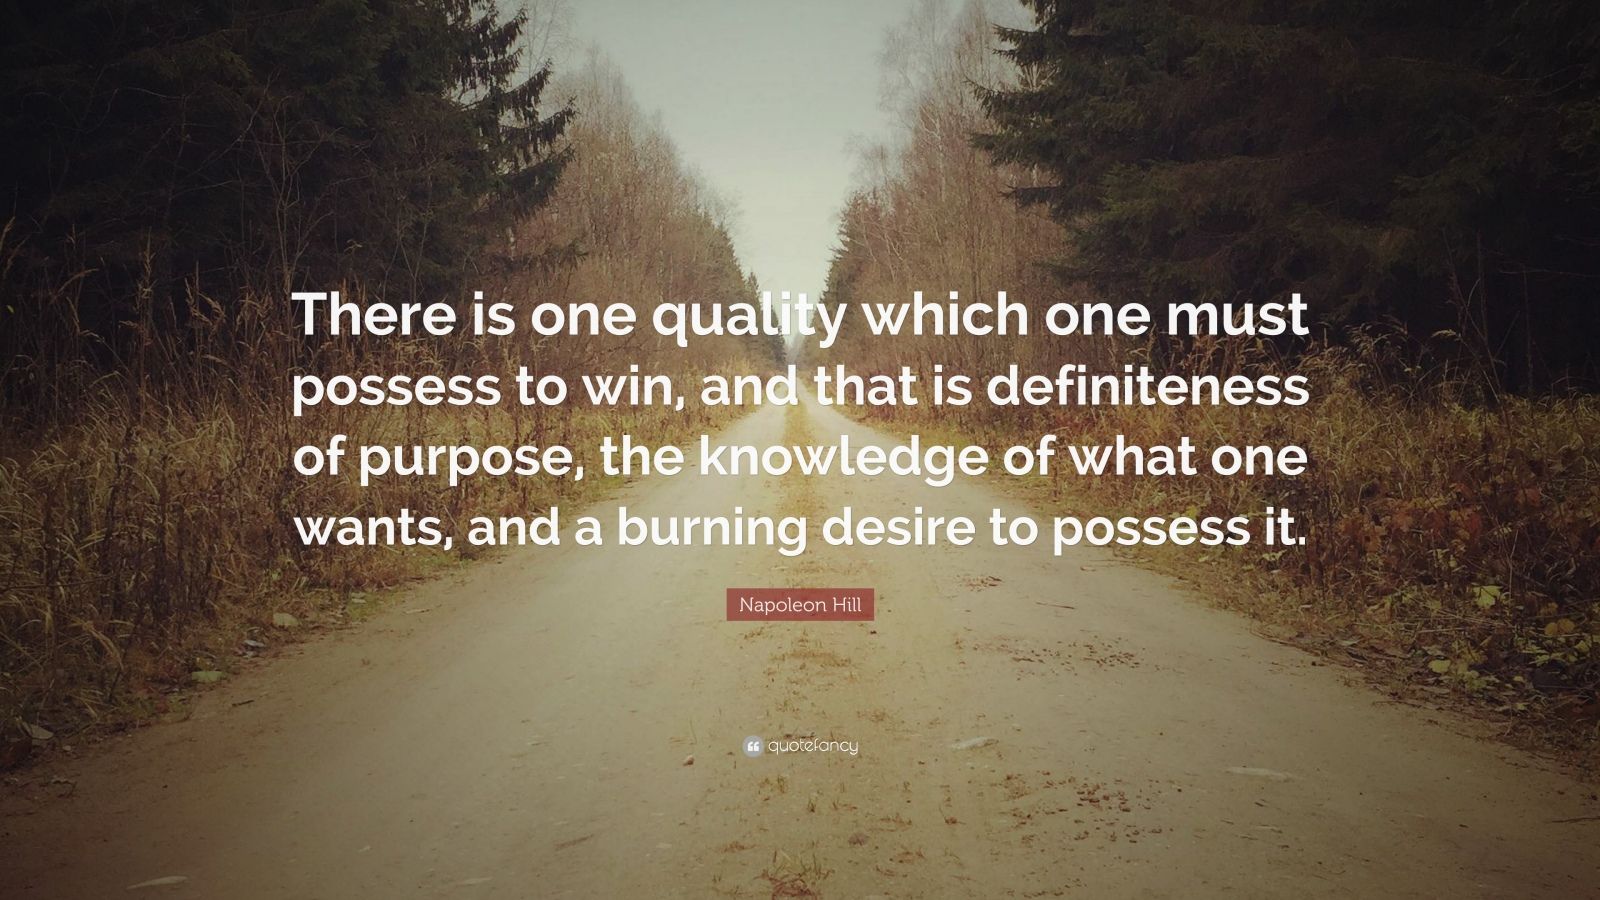 Napoleon Hill Quote: “There is one quality which one must possess to